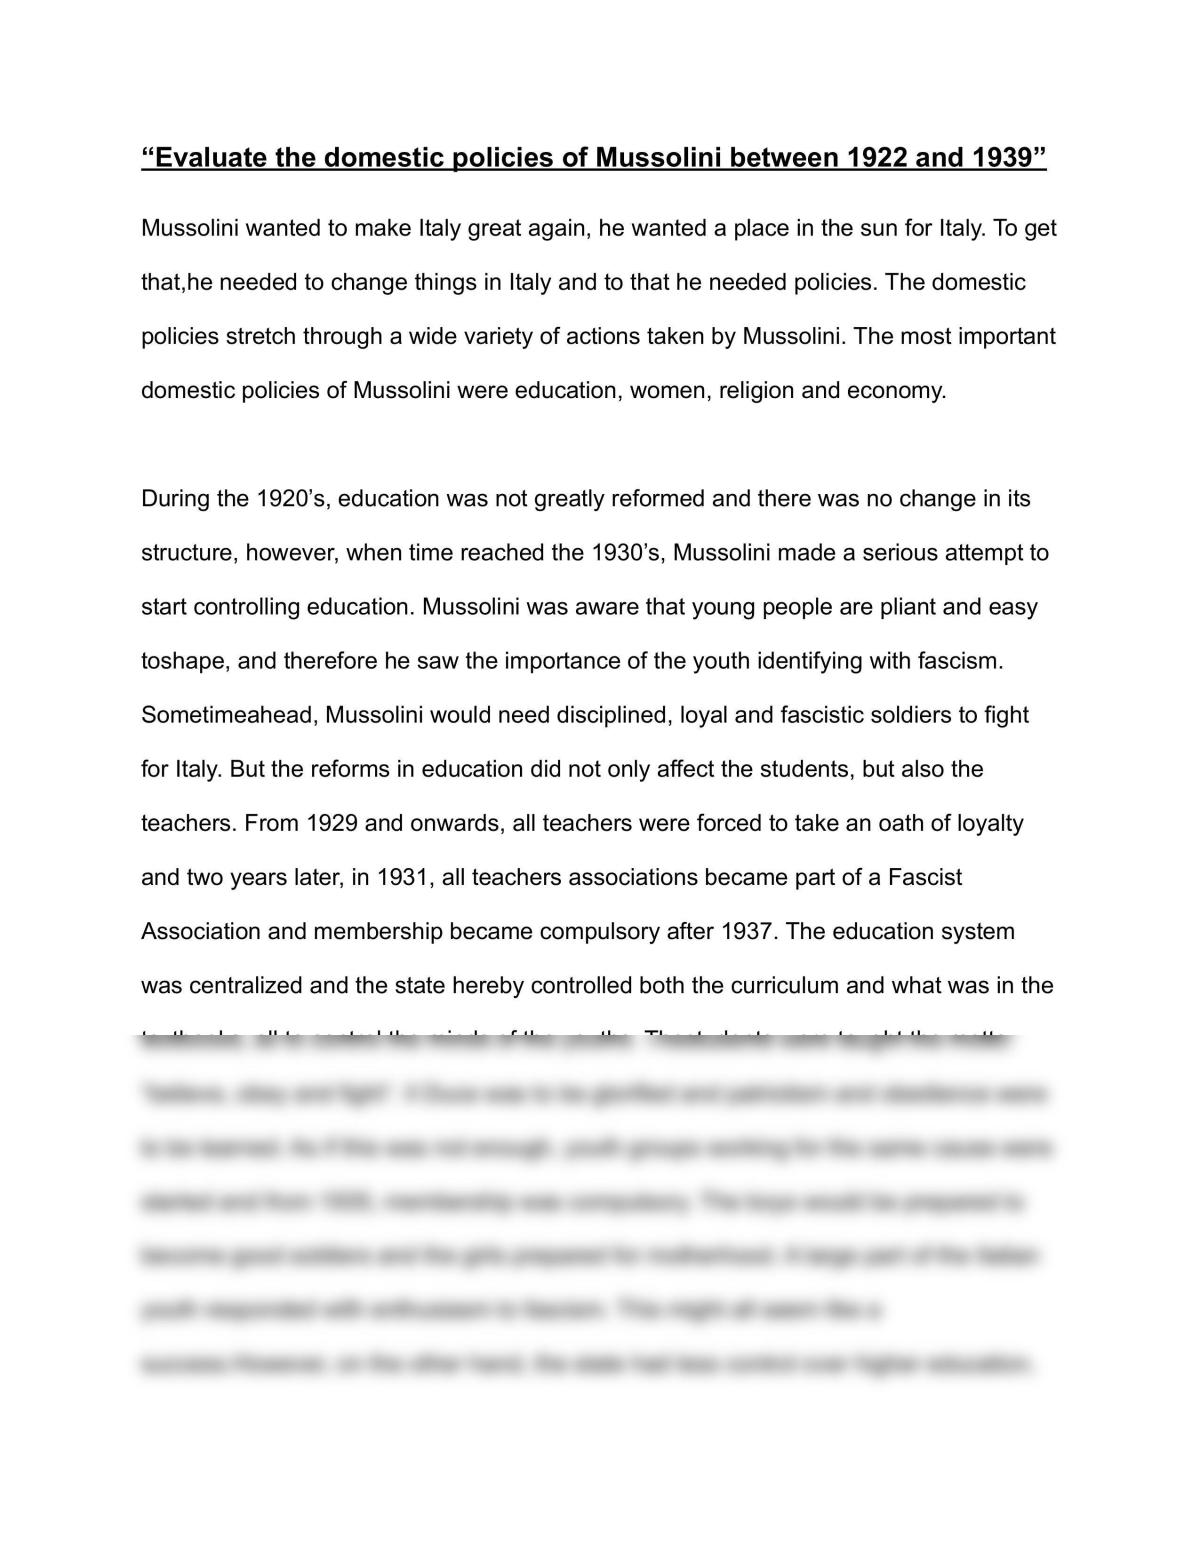 Evaluate the Domestic Policies of Mussolini Between 1922 and 1939 - Page 1